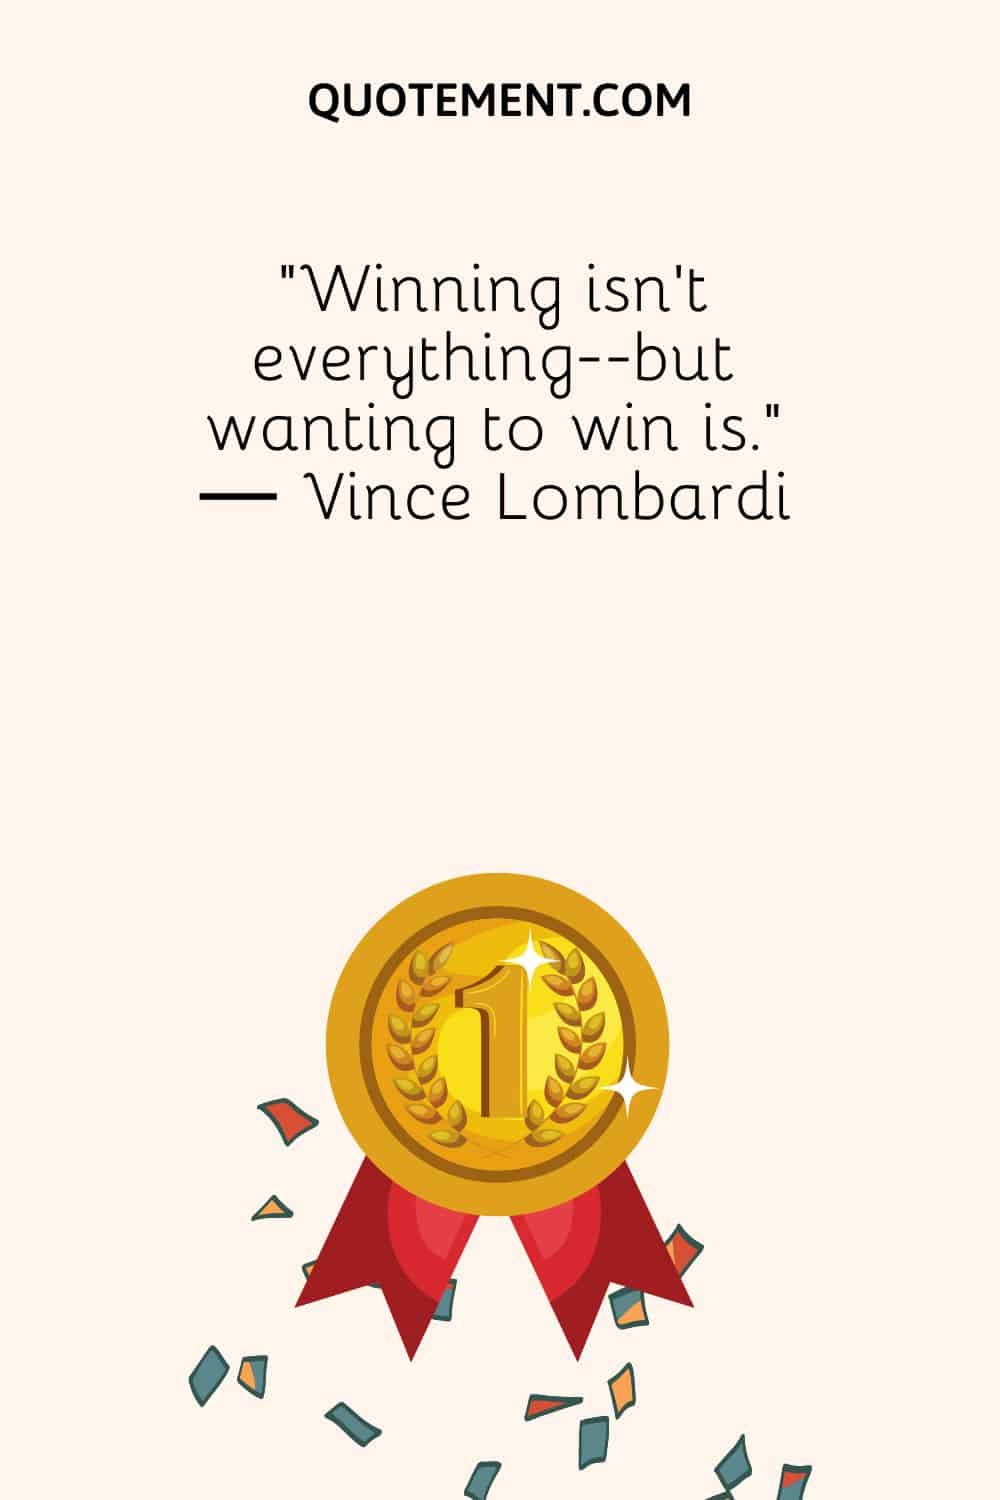 gold medal representing winner quote